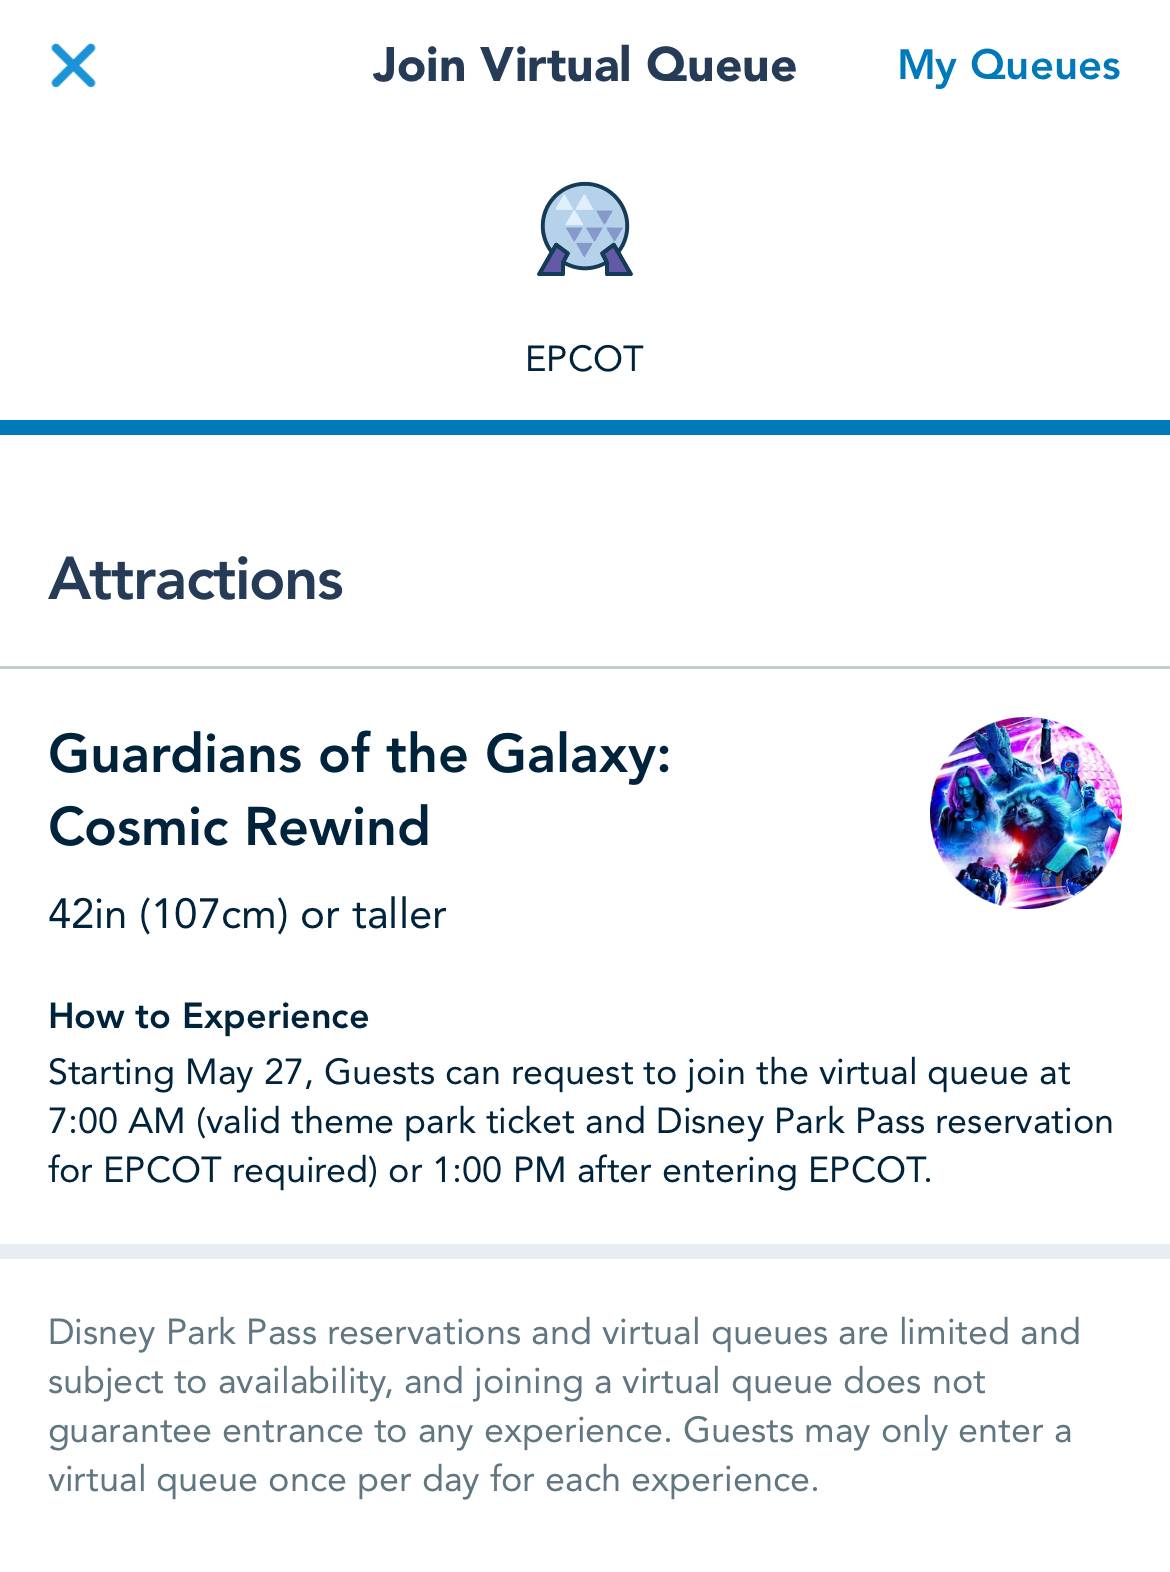 Guardians of the Galaxy Cosmic Rewind Virtual Queue now in My Disney Experience